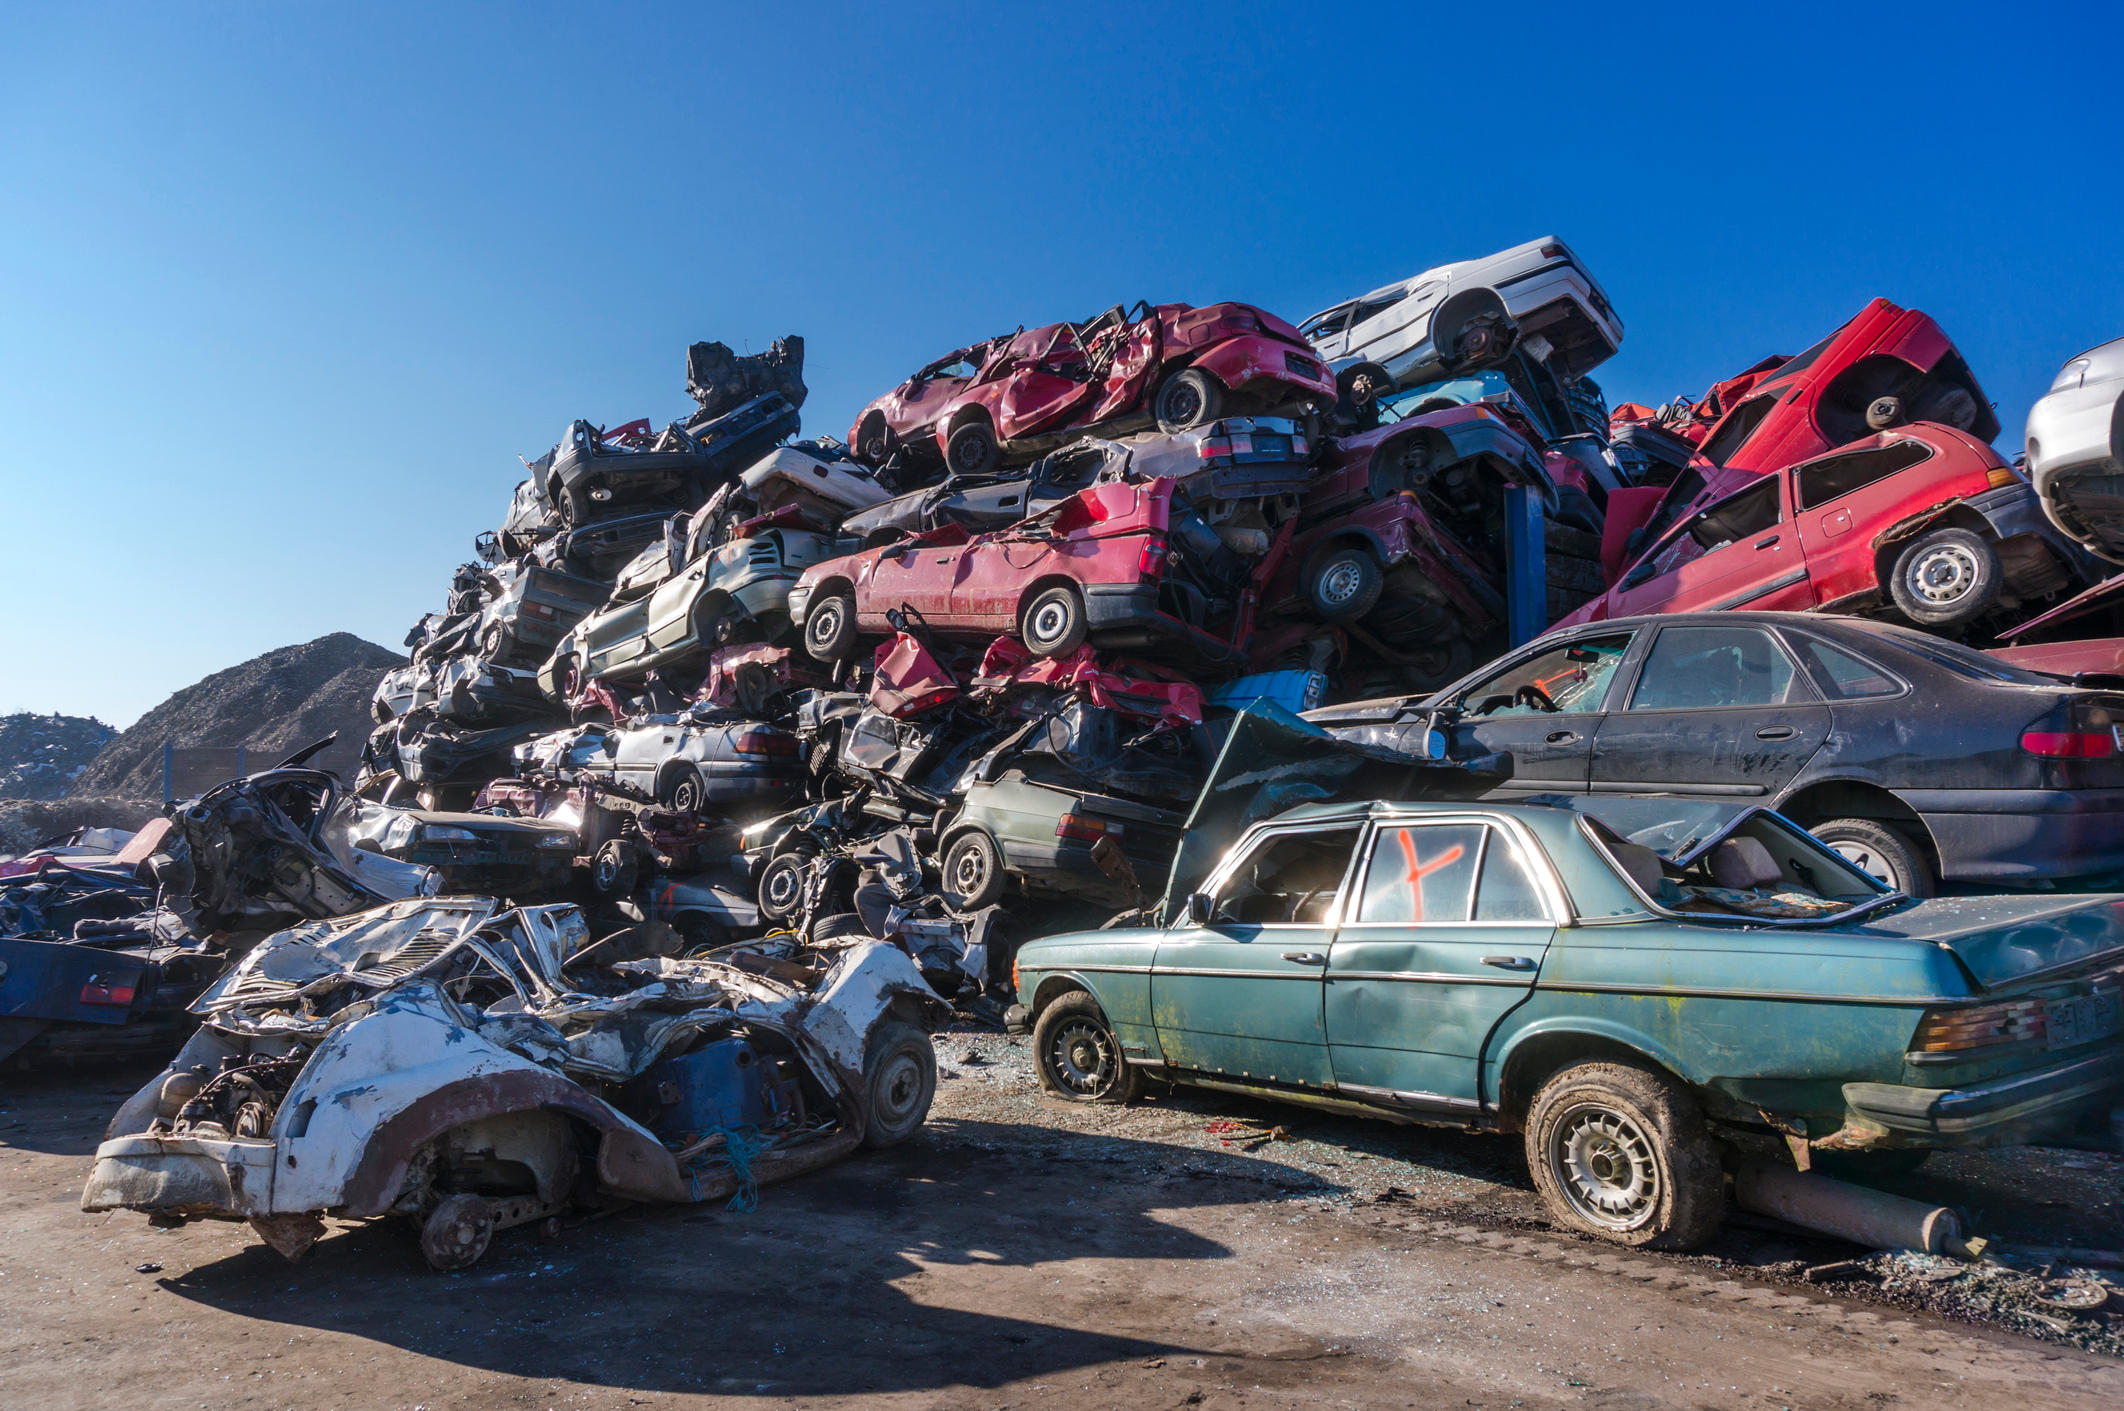 NYC Auto Recycling has many years of experience! Let us help you get rid of your cash car and we'll pay you cash for it today!